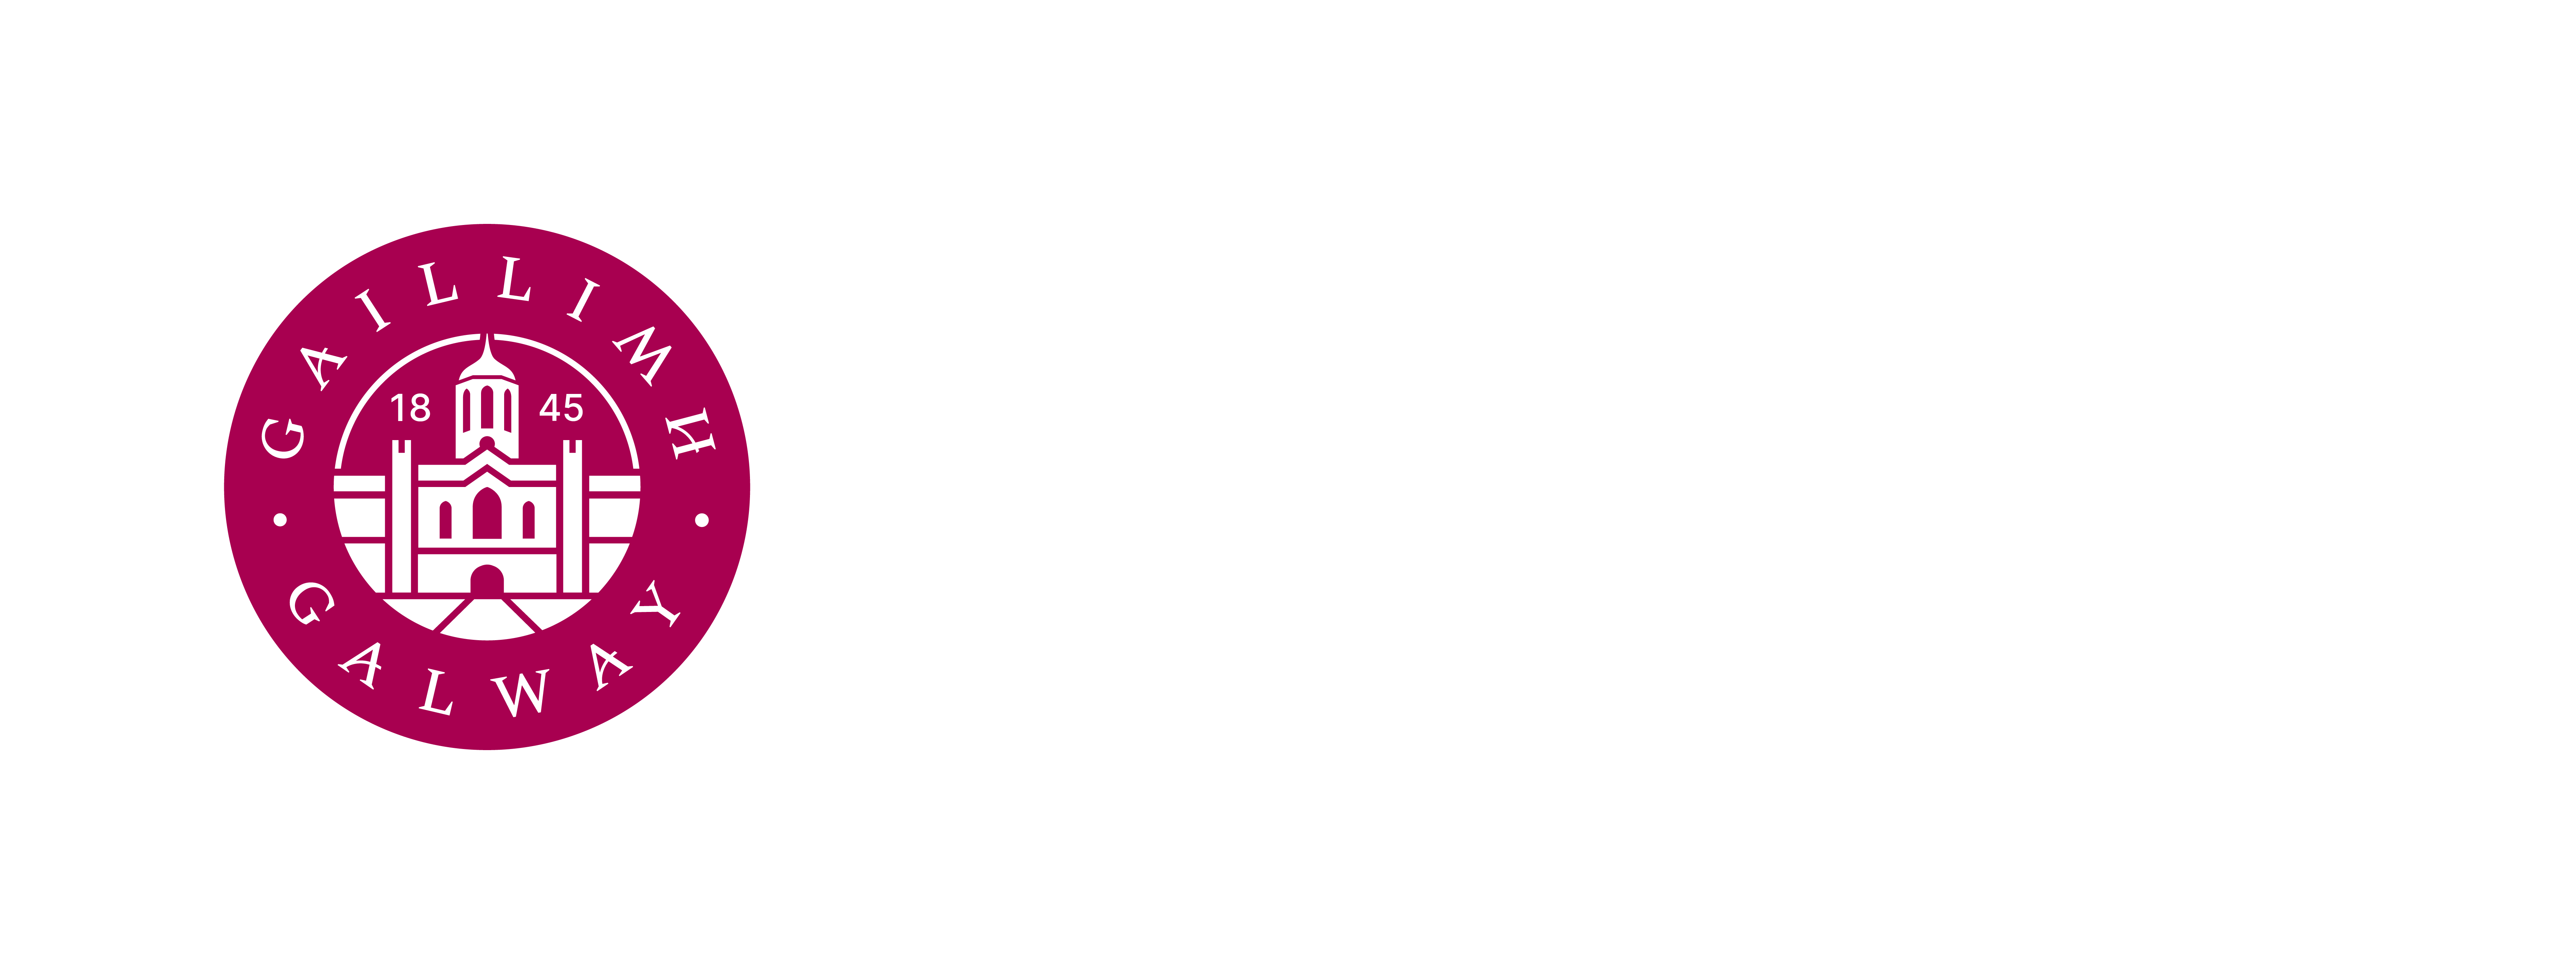 University of Galway Sports